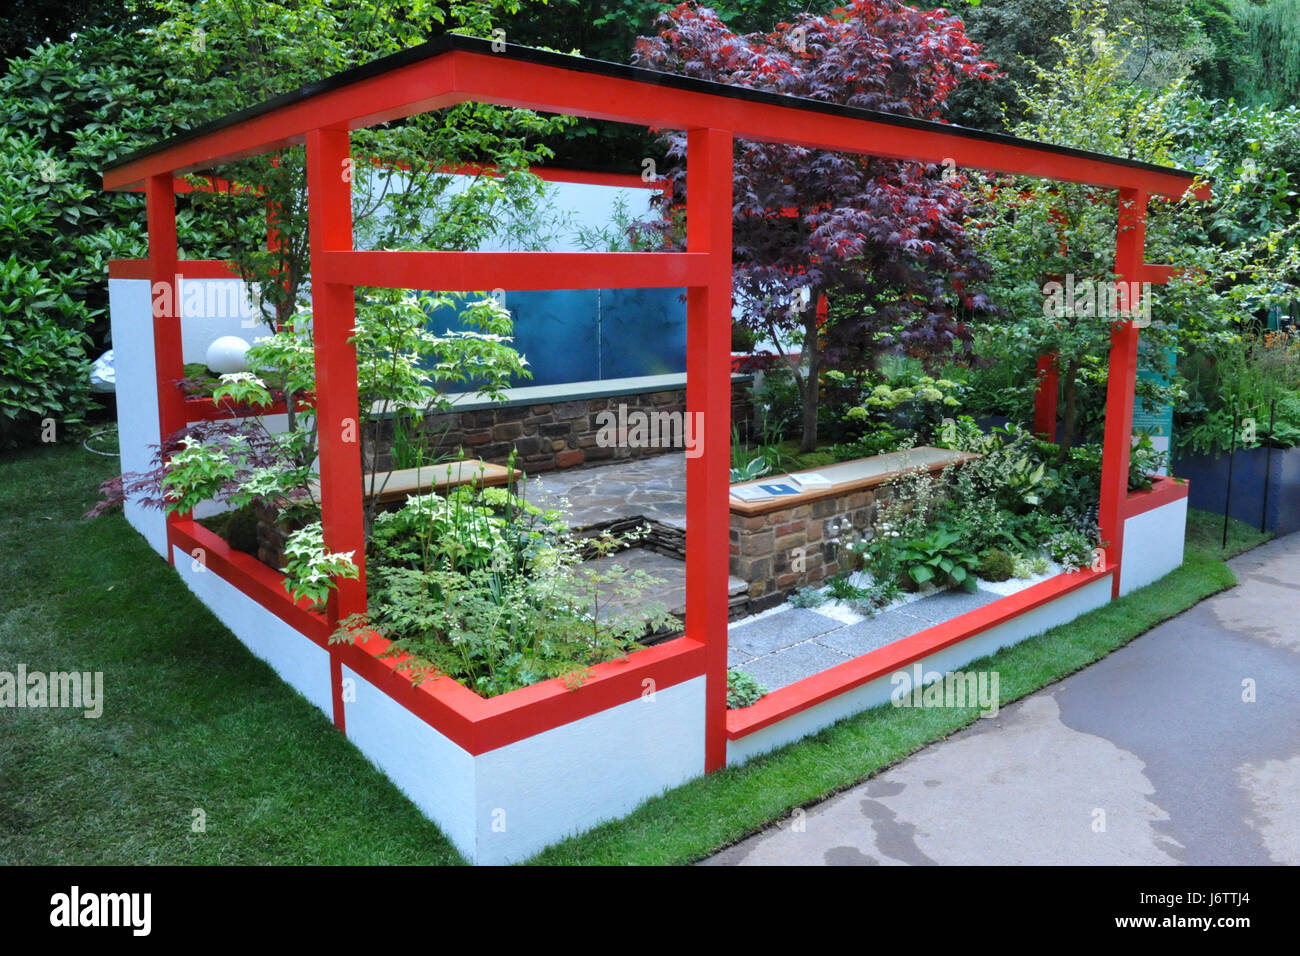 London, UK. 22nd May, 2017. The Hagakure - Hidden Leaves Garden (designed by Shuko Noda), one of the nine beautiful and elegant Artisan gardens on display at the 2017 RHS Chelsea Flower Show which opened today, London, UK.  Artisan gardens revitalise traditional designs, materials and methods with new approaches to craft and craftsmanship. Representing some of the most imaginative and inspiring designs, these smaller gardens put a modern twist on timeless rustic ideas. Credit: Michael Preston/Alamy Live News Stock Photo